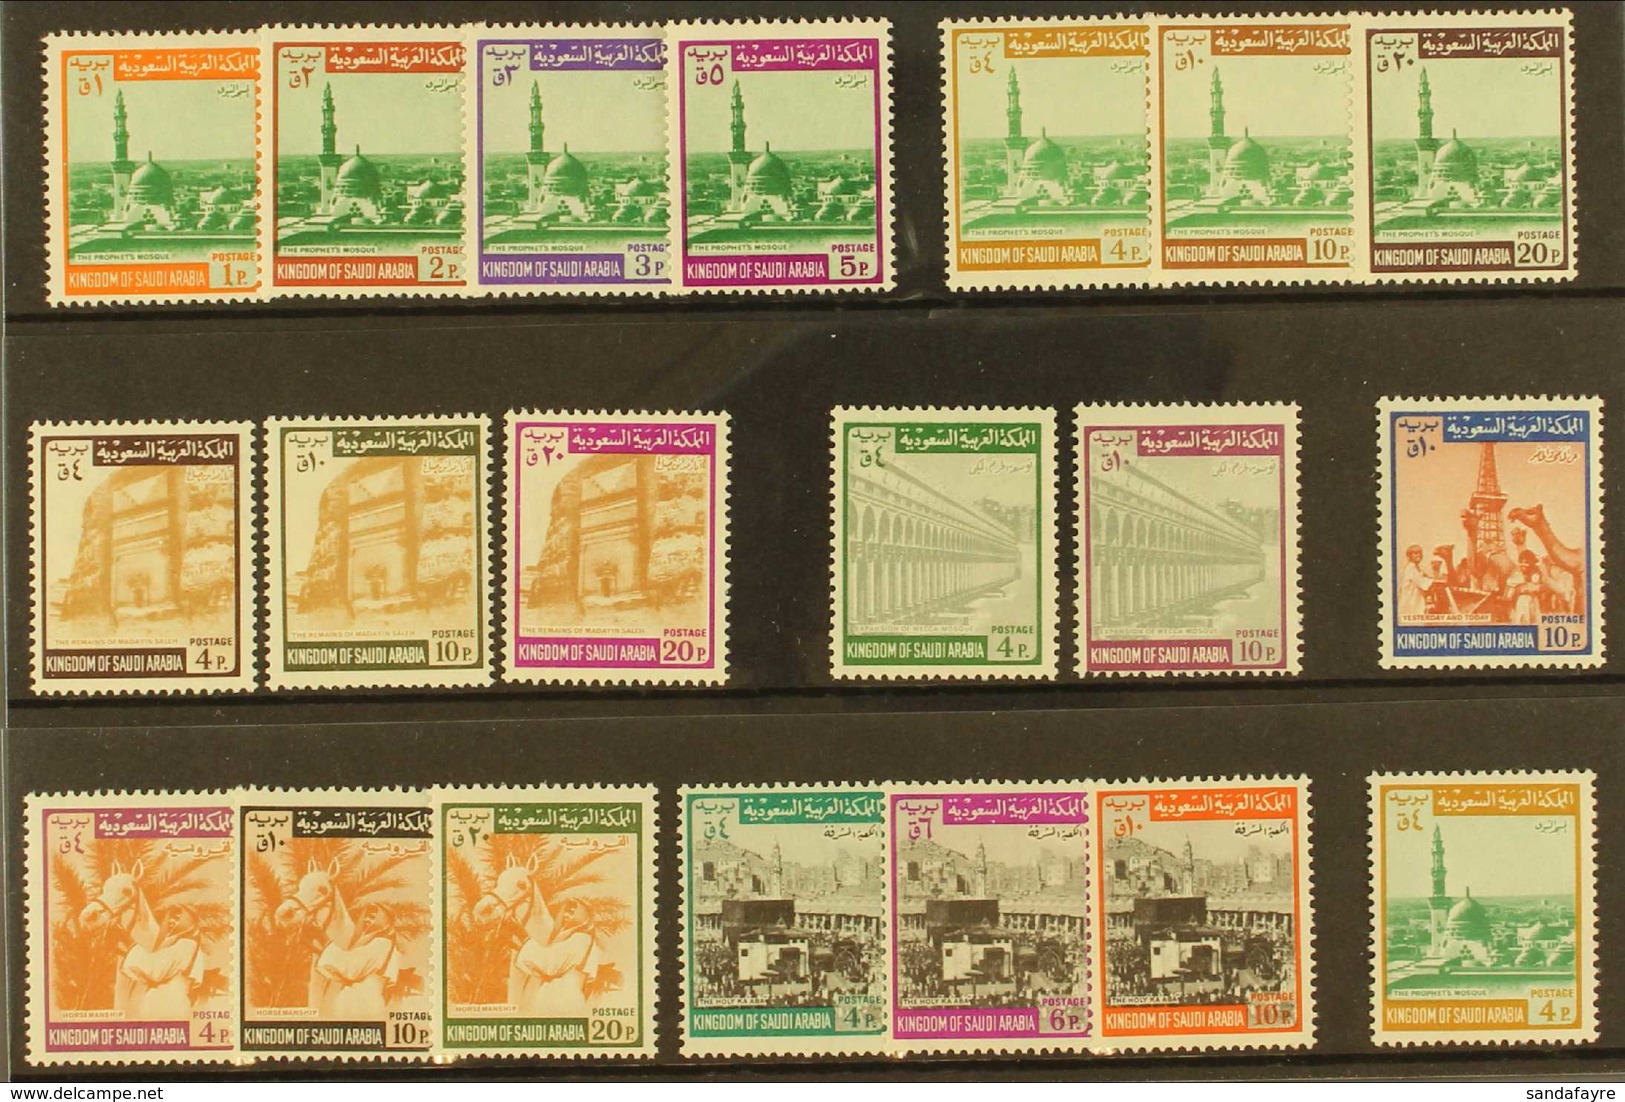 1968-75 ALL DIFFERENT Definitives Collection To Different 20p, Presented On A Stock Card. A Most Useful Never Hinged Min - Saoedi-Arabië